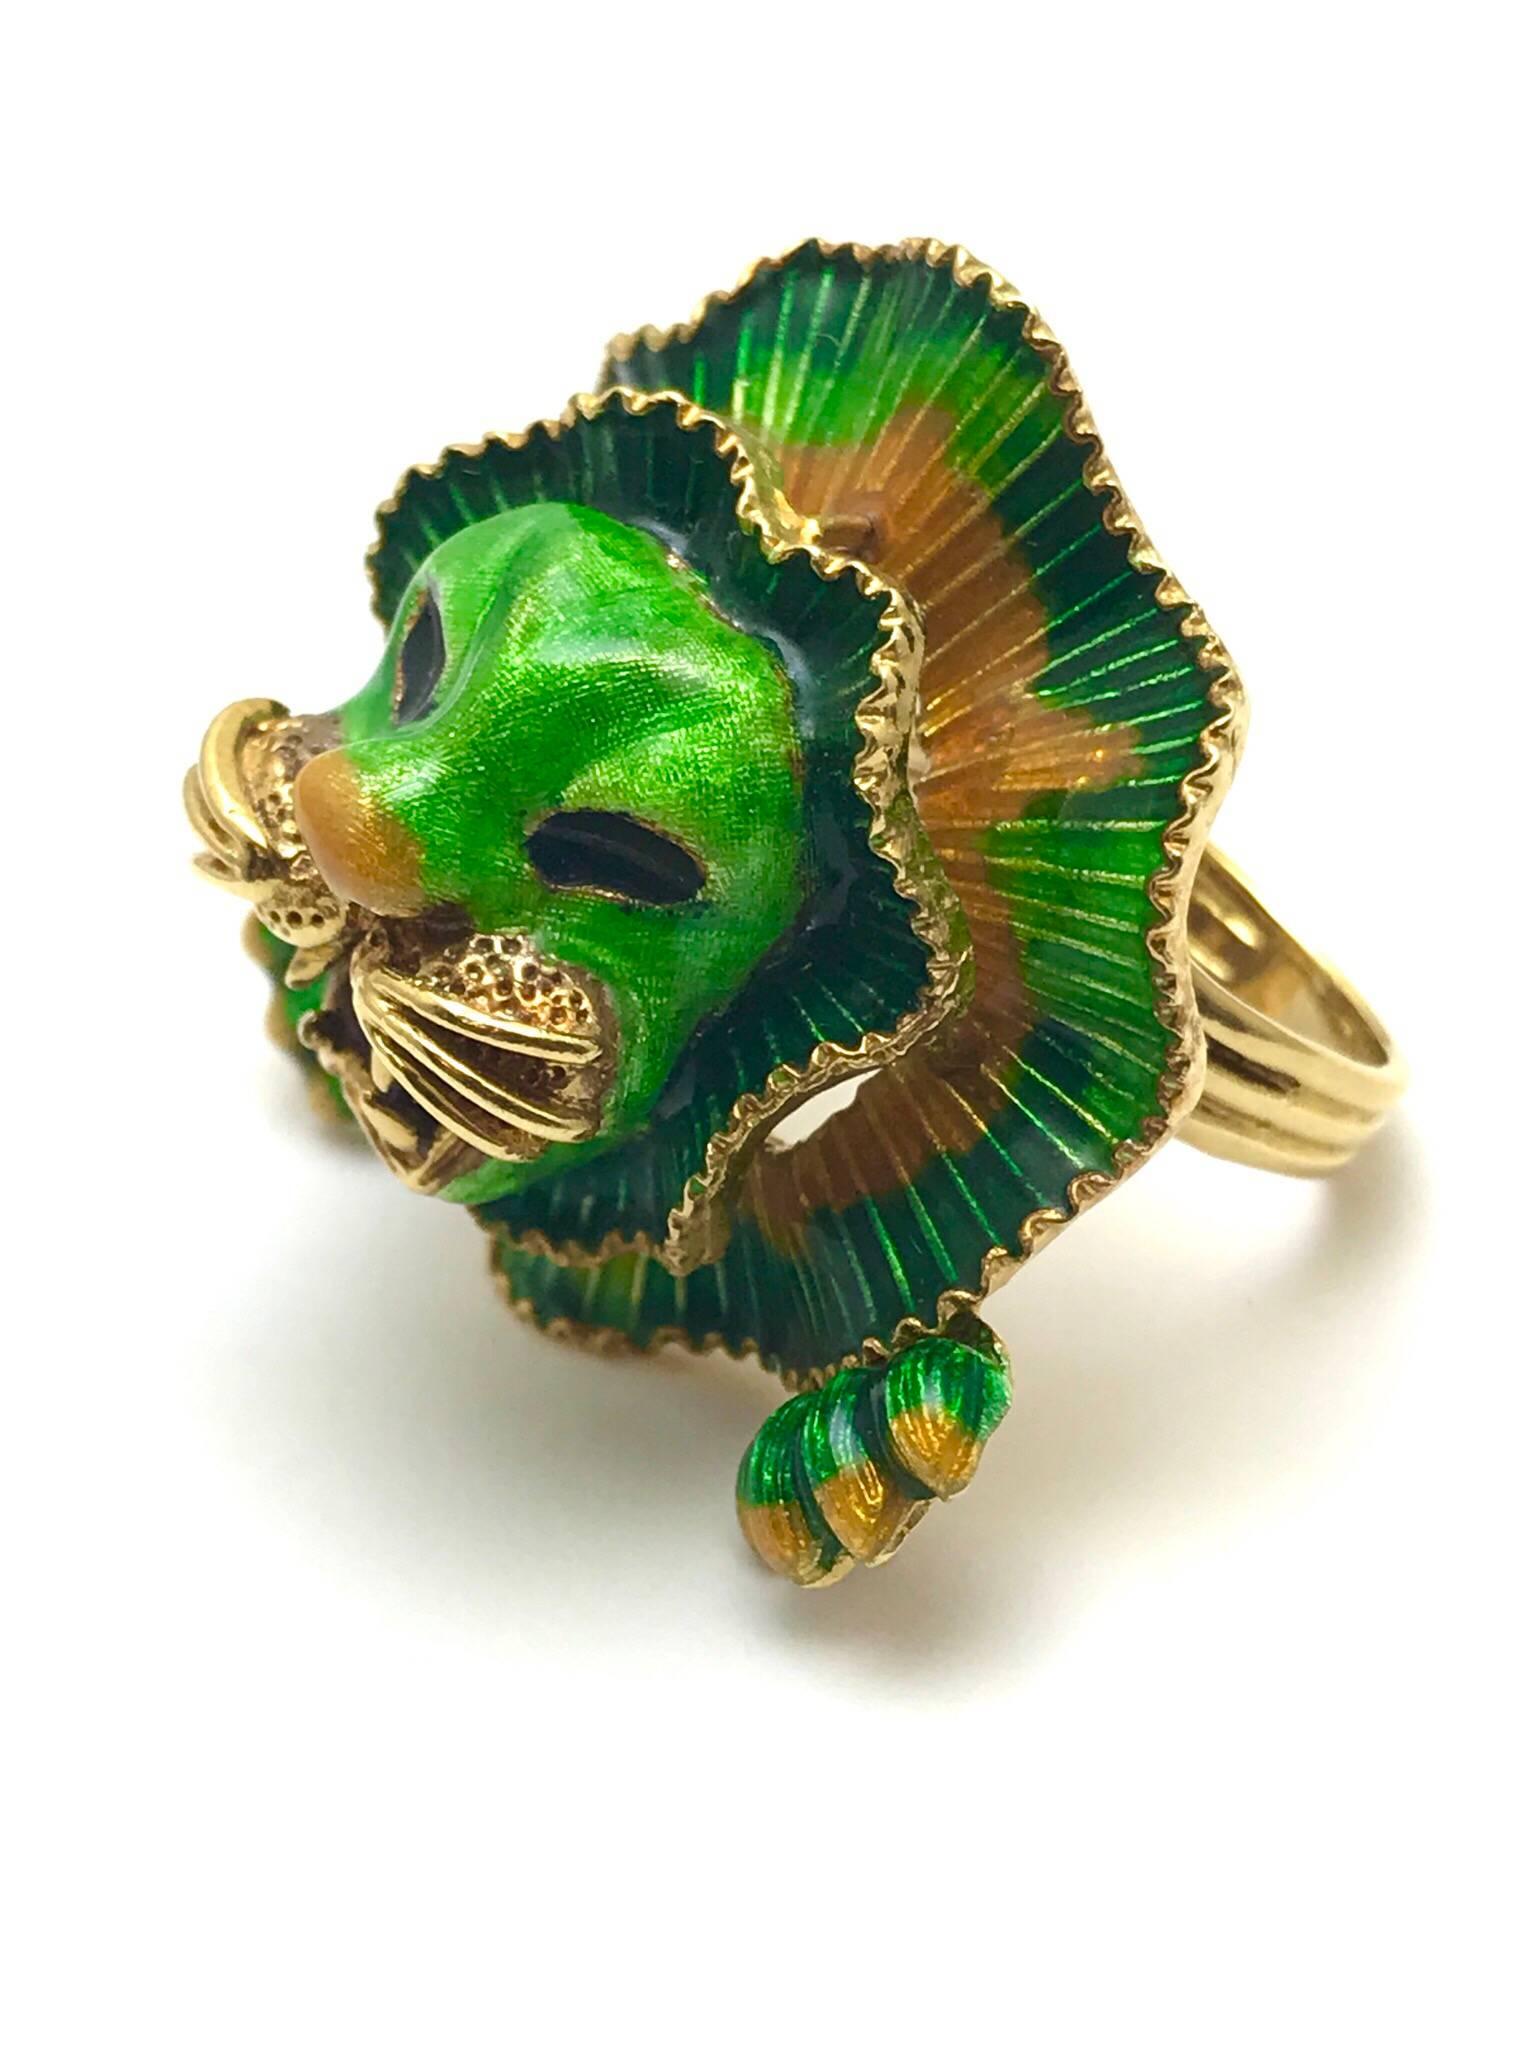 A green orange and red enamel 18 karat yellow gold lion cocktail ring.  The lions mane and paws are made up of the green and orange in a circular pattern of two tiers.  The mouth and whiskers are 18 karat yellow gold, with a red enamel tongue. 